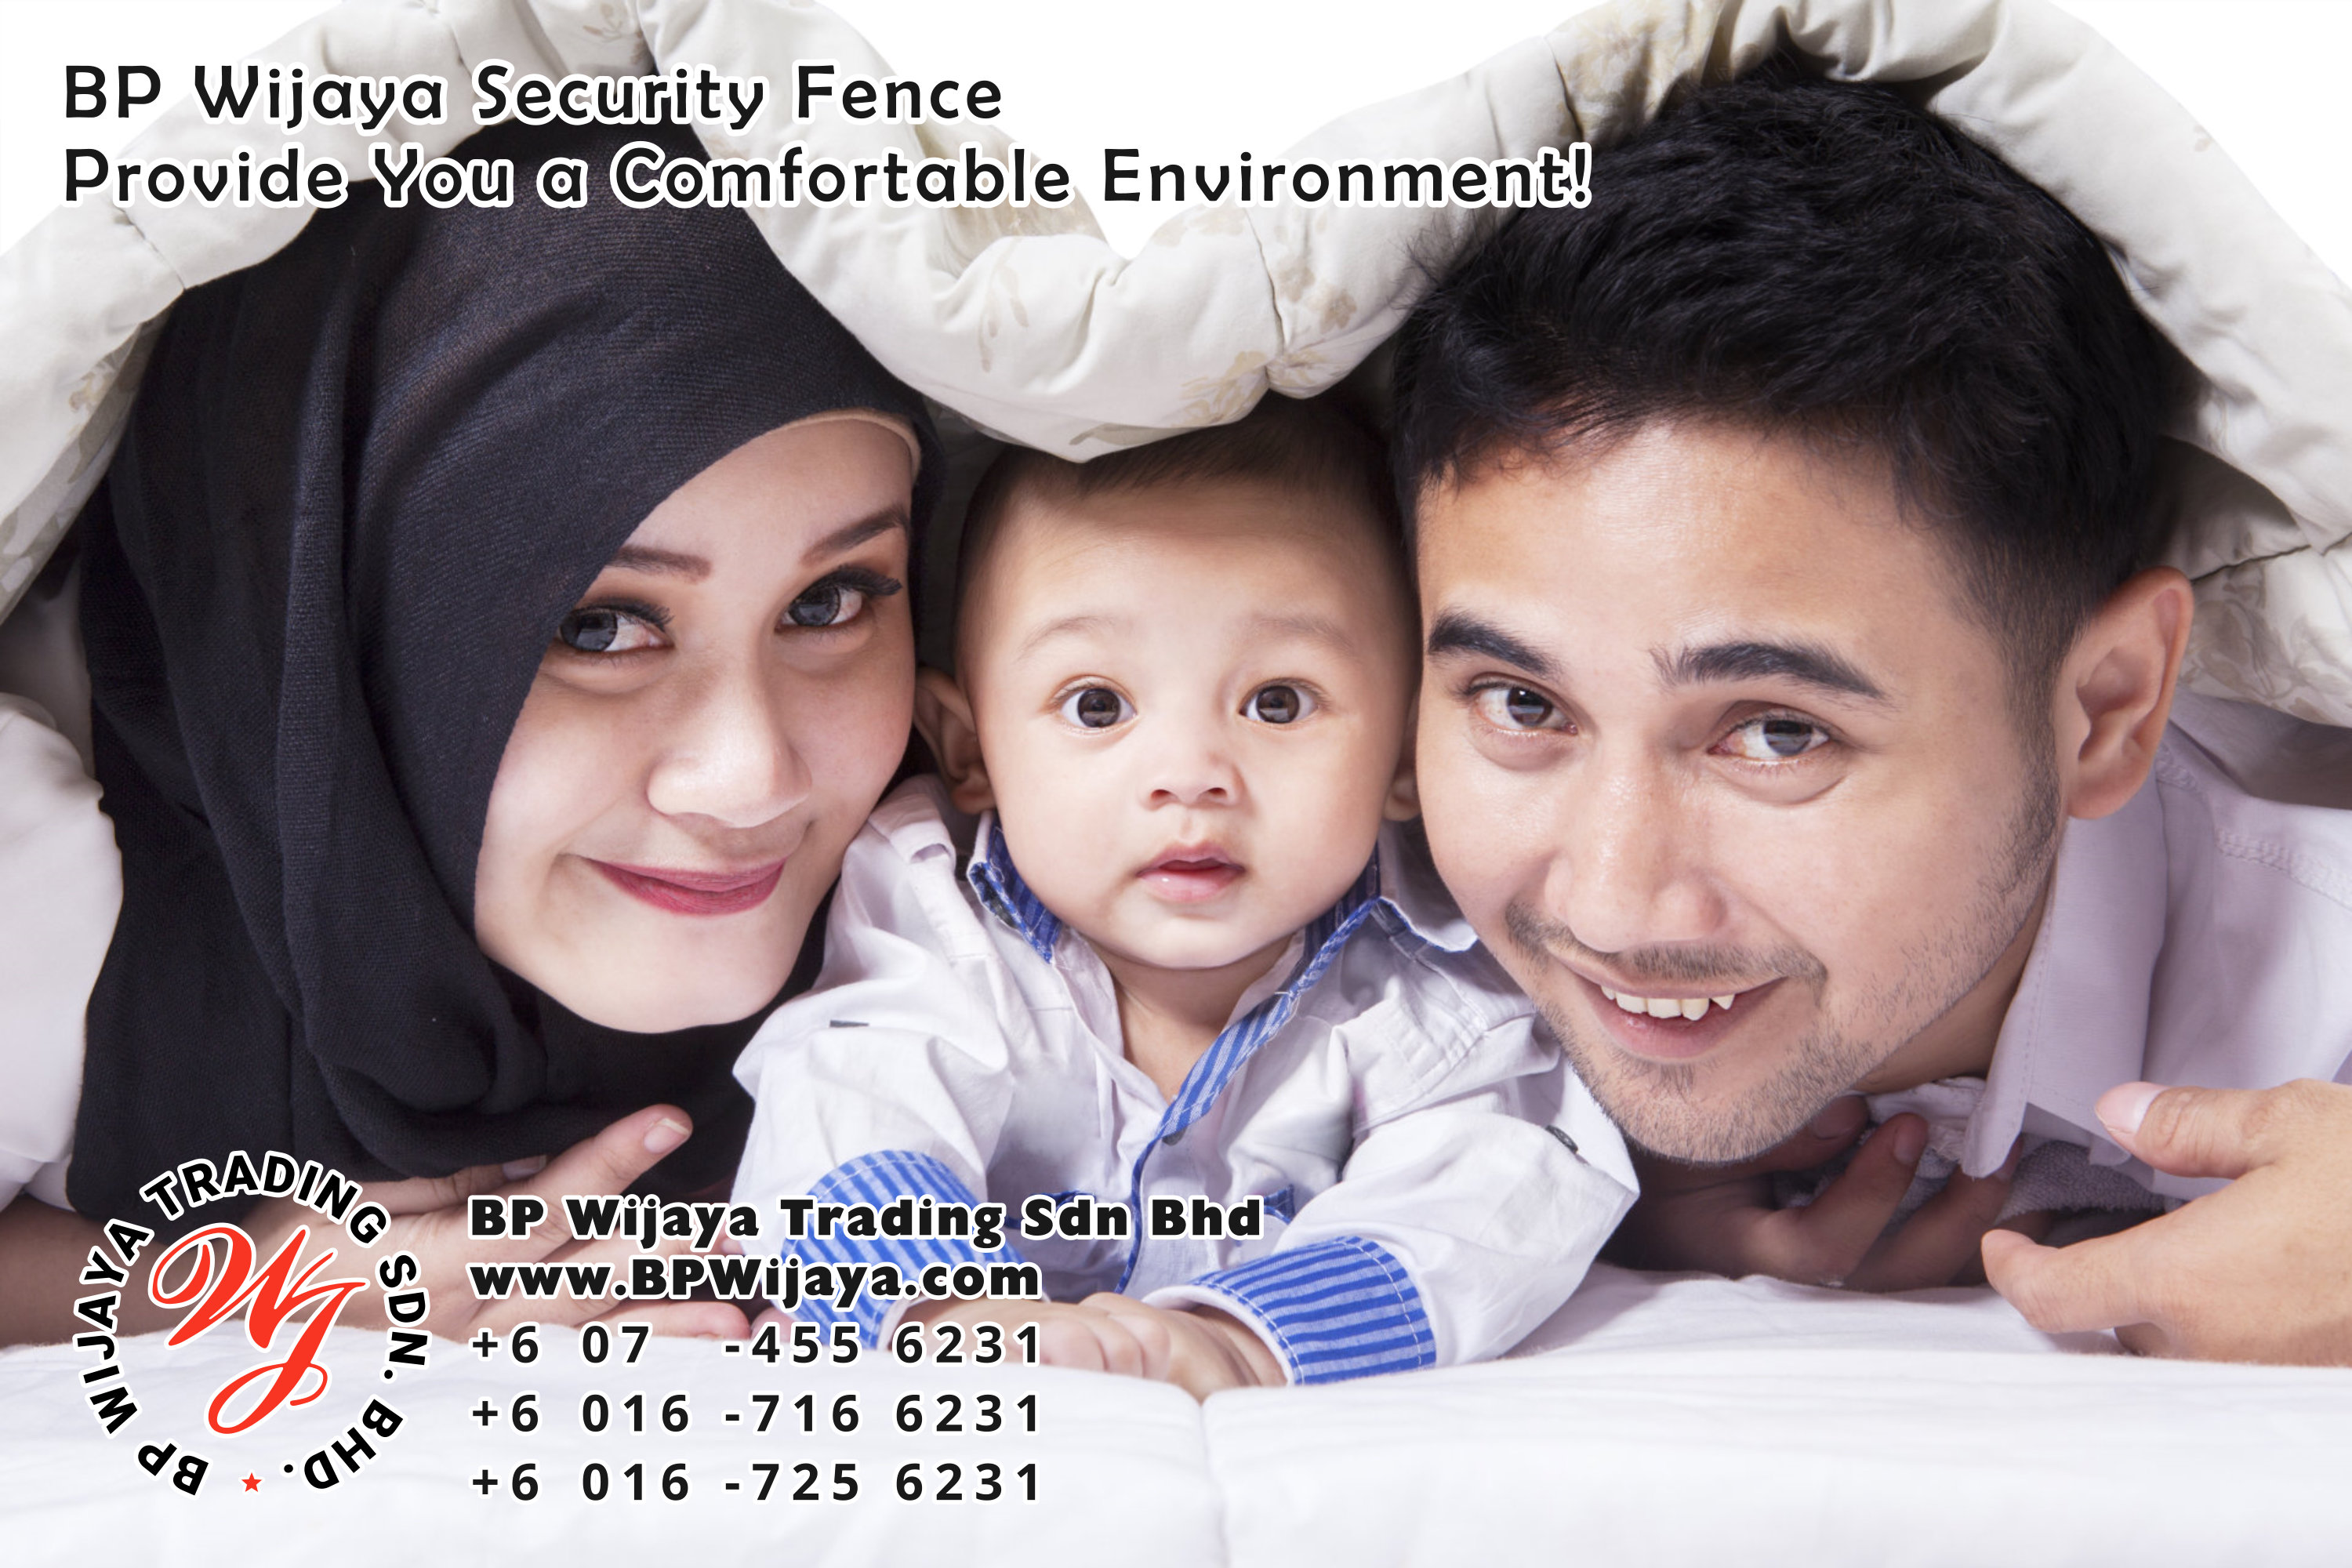 BP Wijaya Trading Sdn Bhd Malaysia Selangor Kuala Lumpur manufacturer of safety fences building materials for housing construction site Security fencing factory security home security A01-10